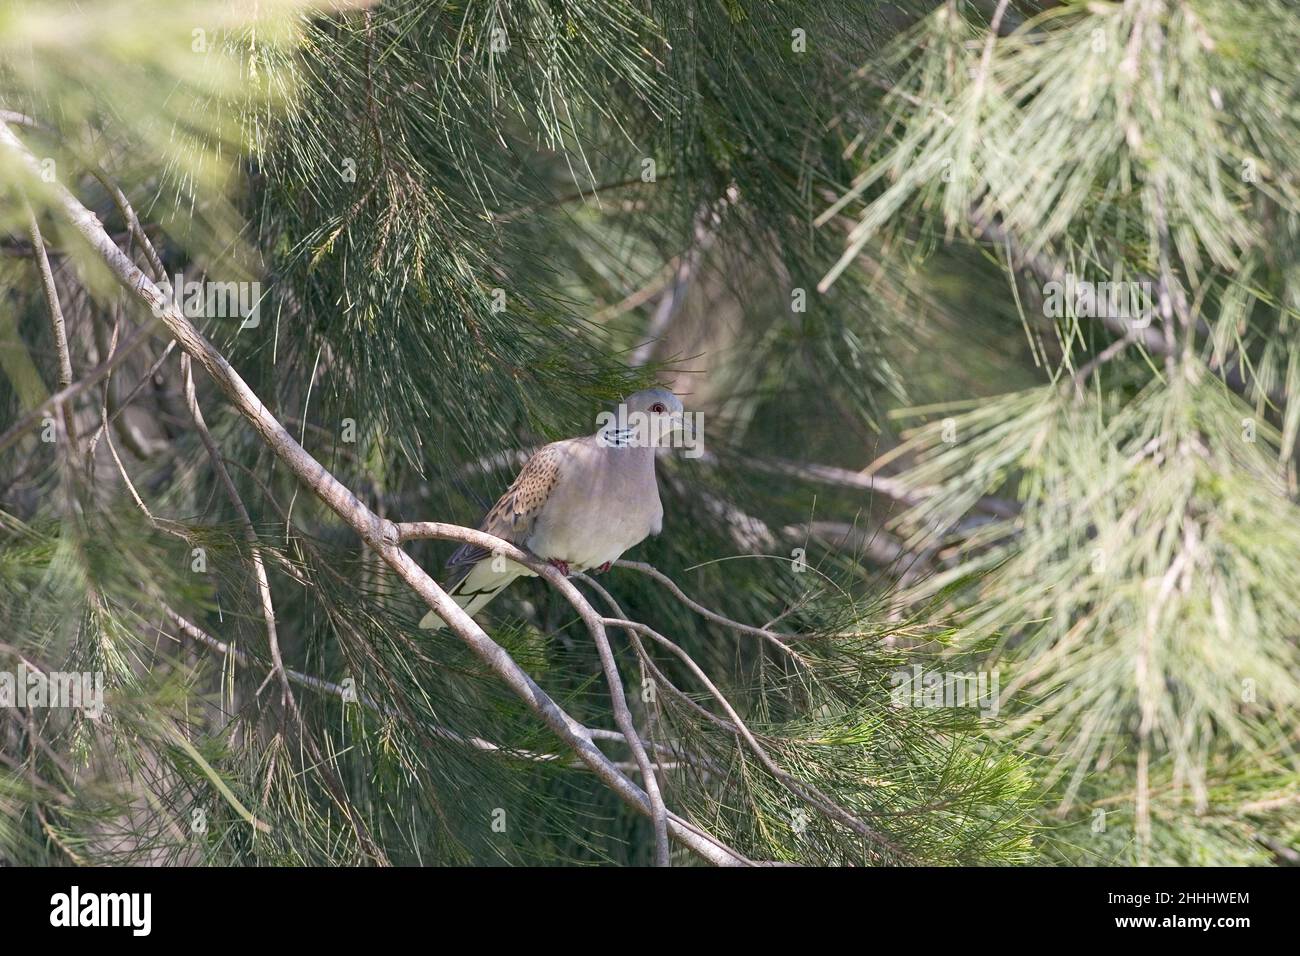 European turtle dove Streptopelia turtur perched in coniferous tree during its spring migration northwards, Corsica France Stock Photo